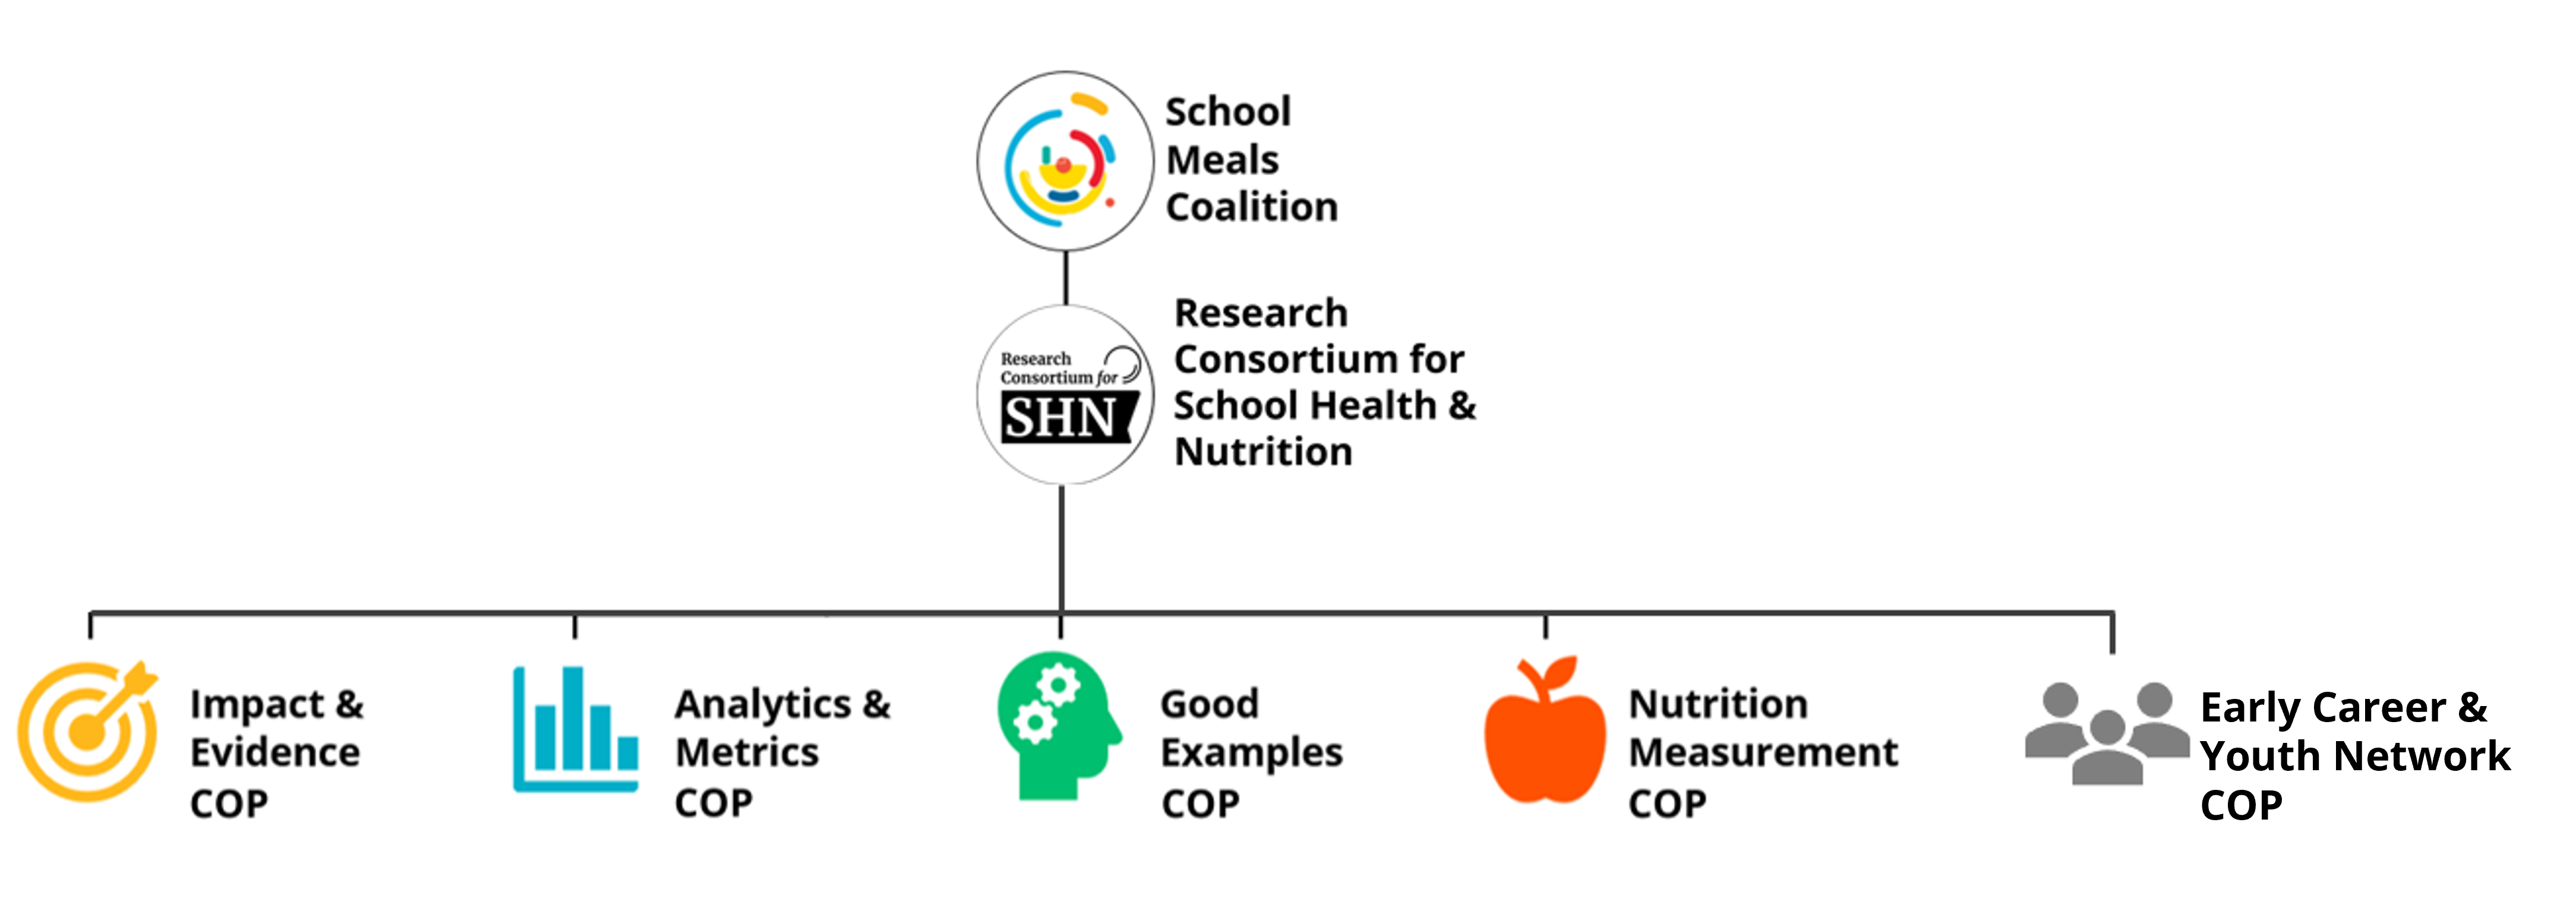 Image with symbols showing organisational structure - headed by the School Meals Coalition, with the Secretariat below and four communities of practice in a third row